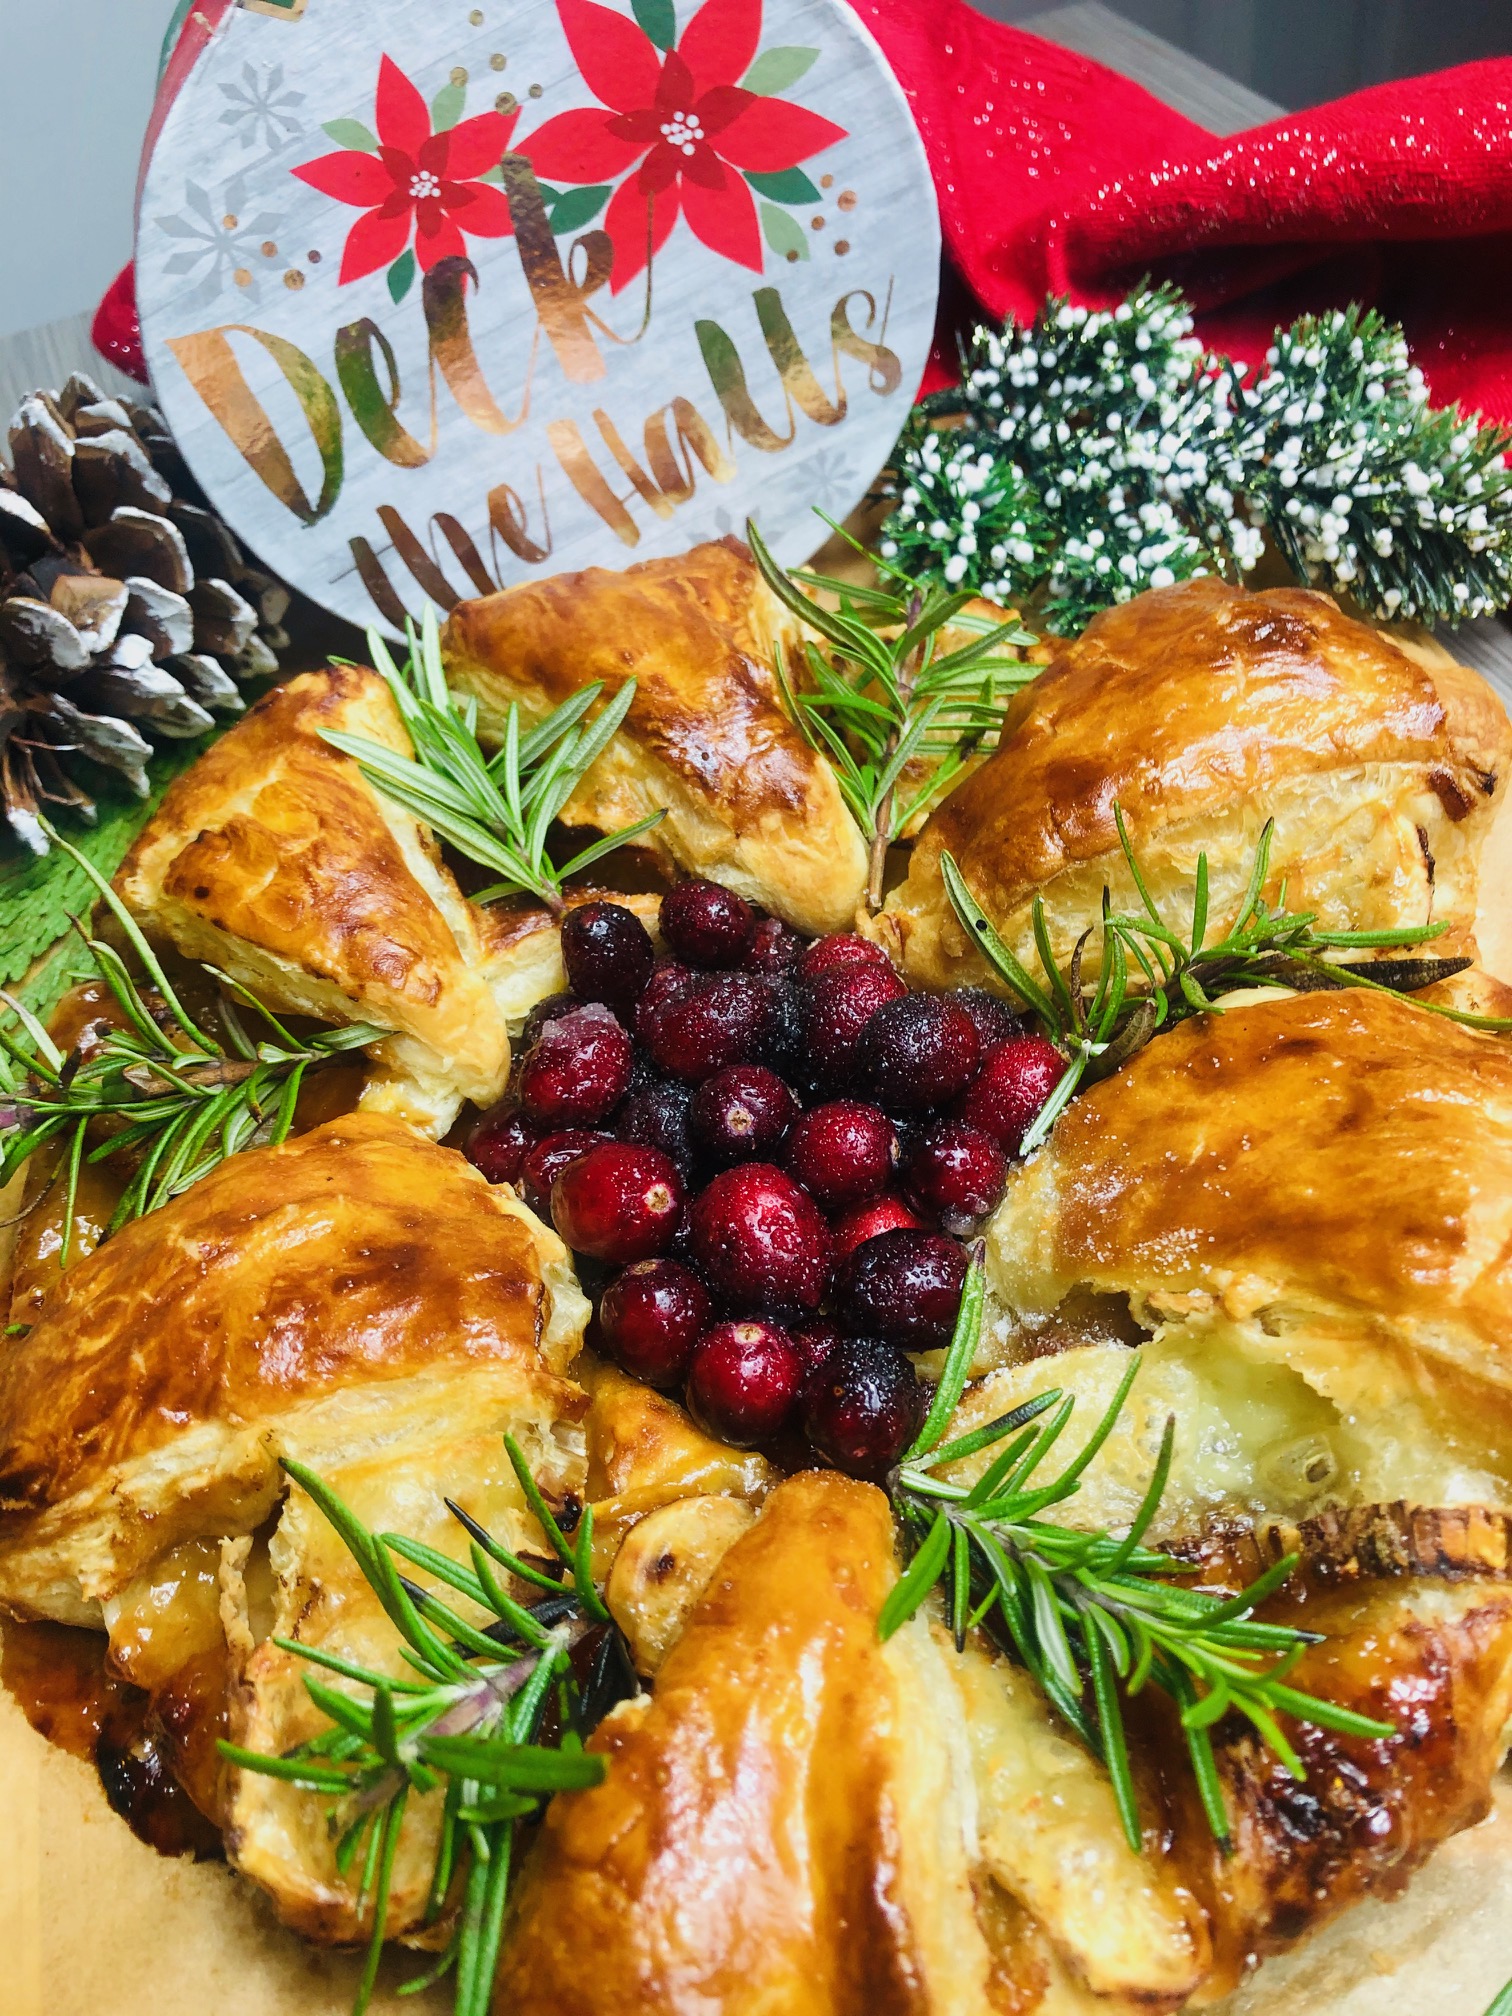 Golden brown puff pastry wreath filled with guava jam and baked brie with a center filled with candied cranberries